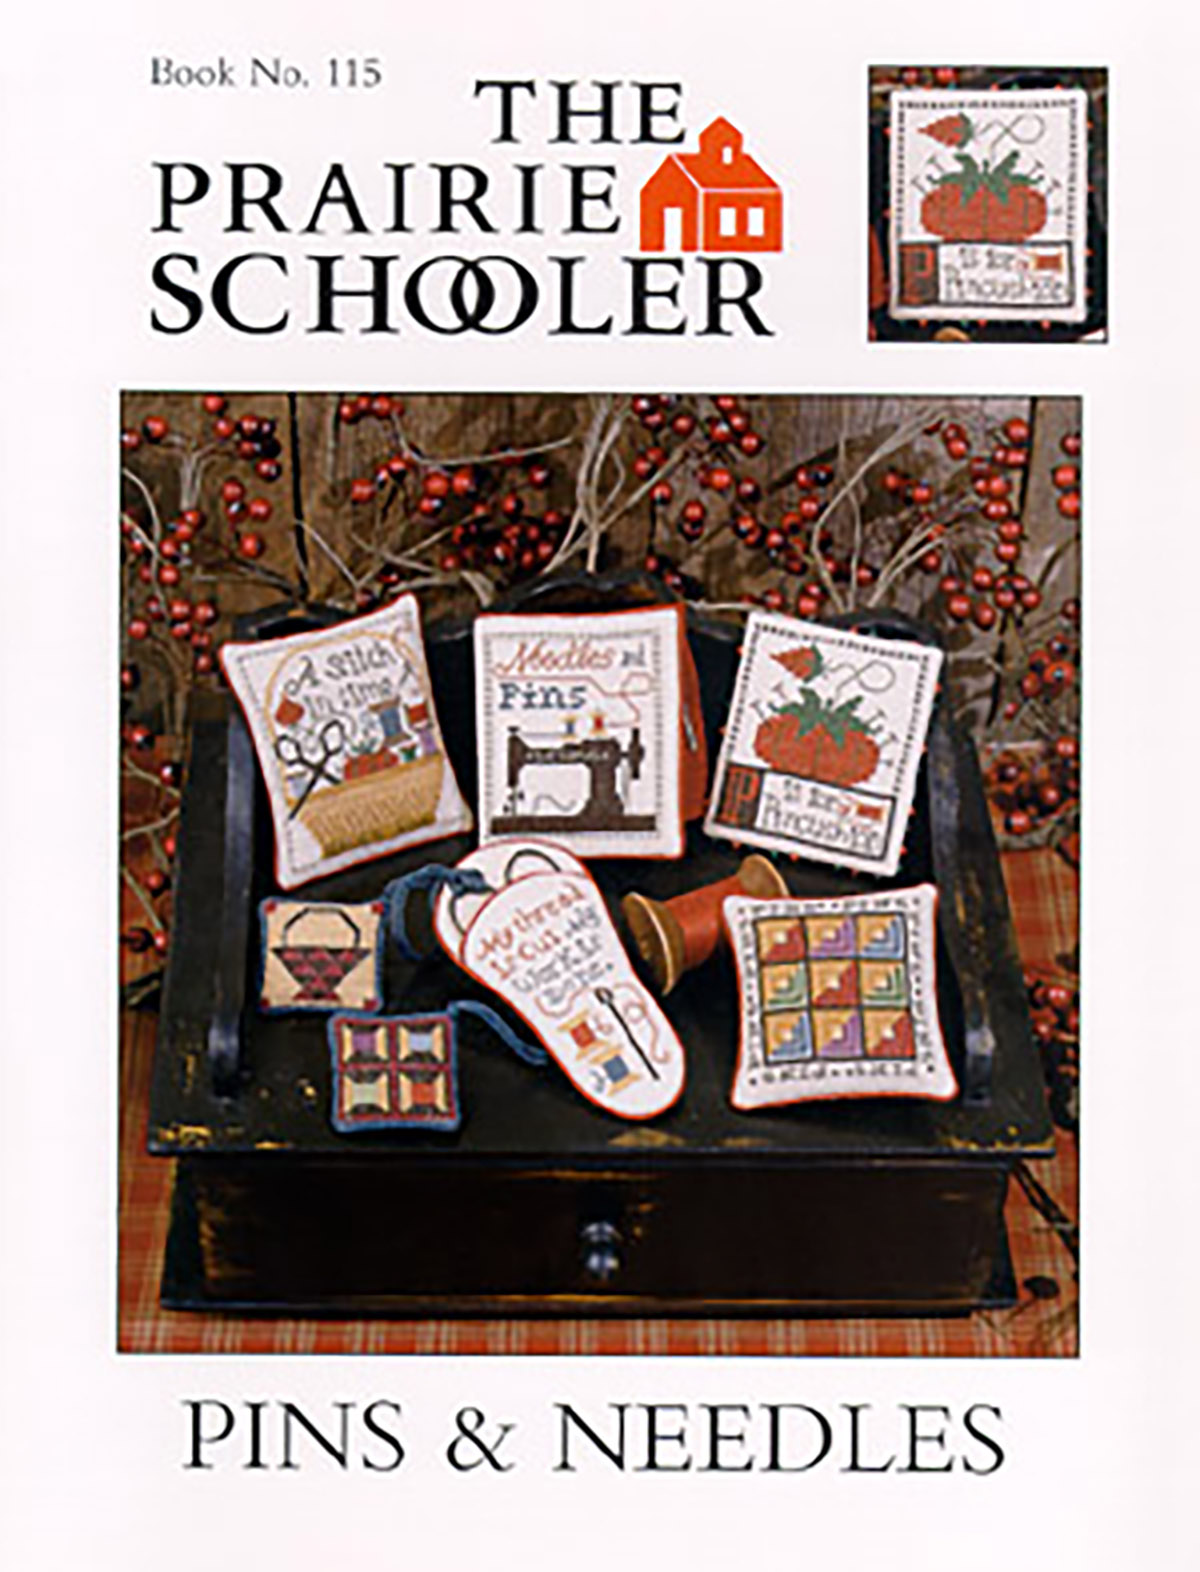 The Prairie Schooler Pins and Needles Cross Stitch Pattern at Anabella's Cross Stitch Store